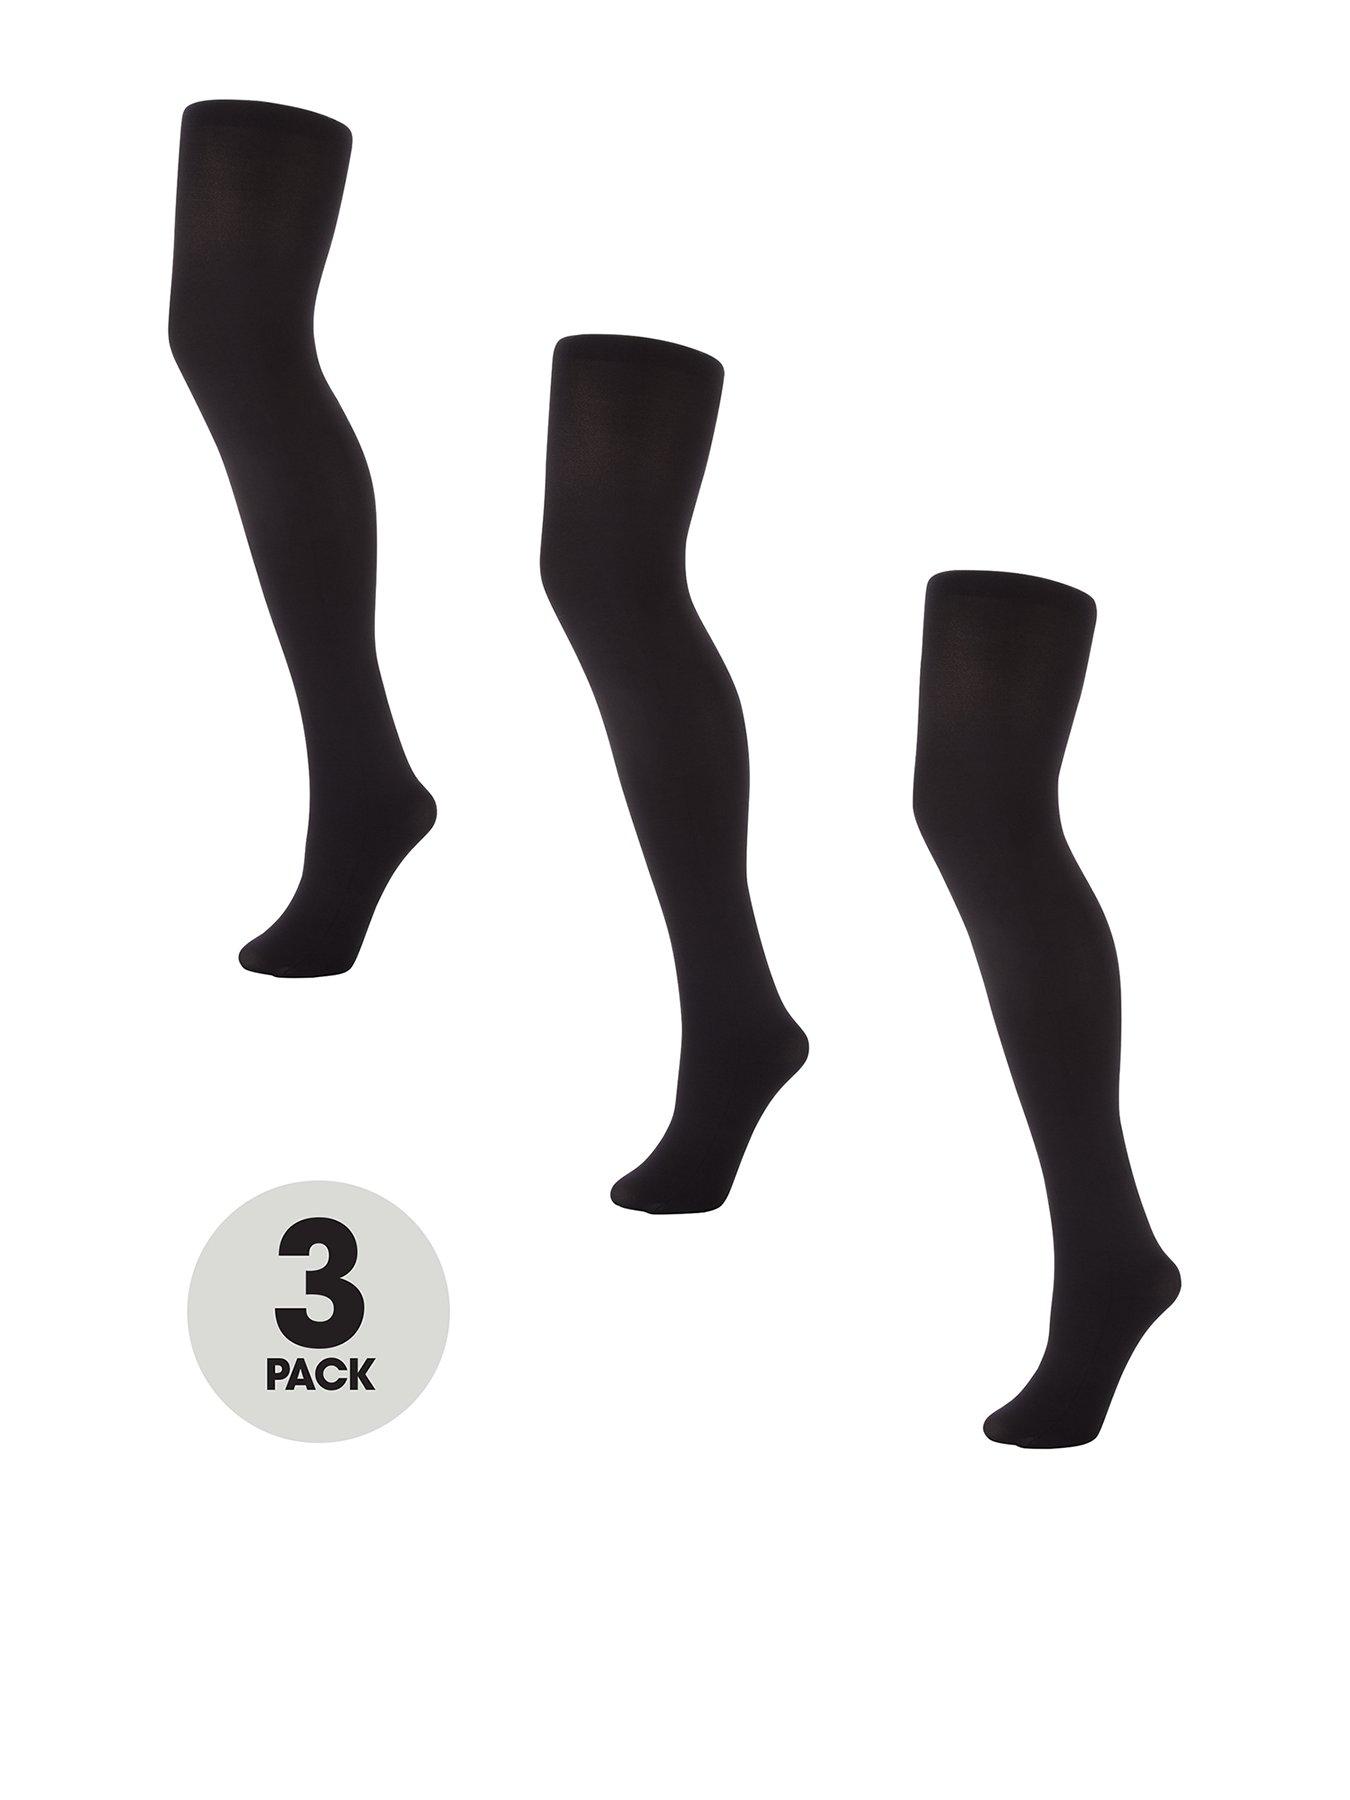 1 Pack Thermal Shaping 200 Denier Tights